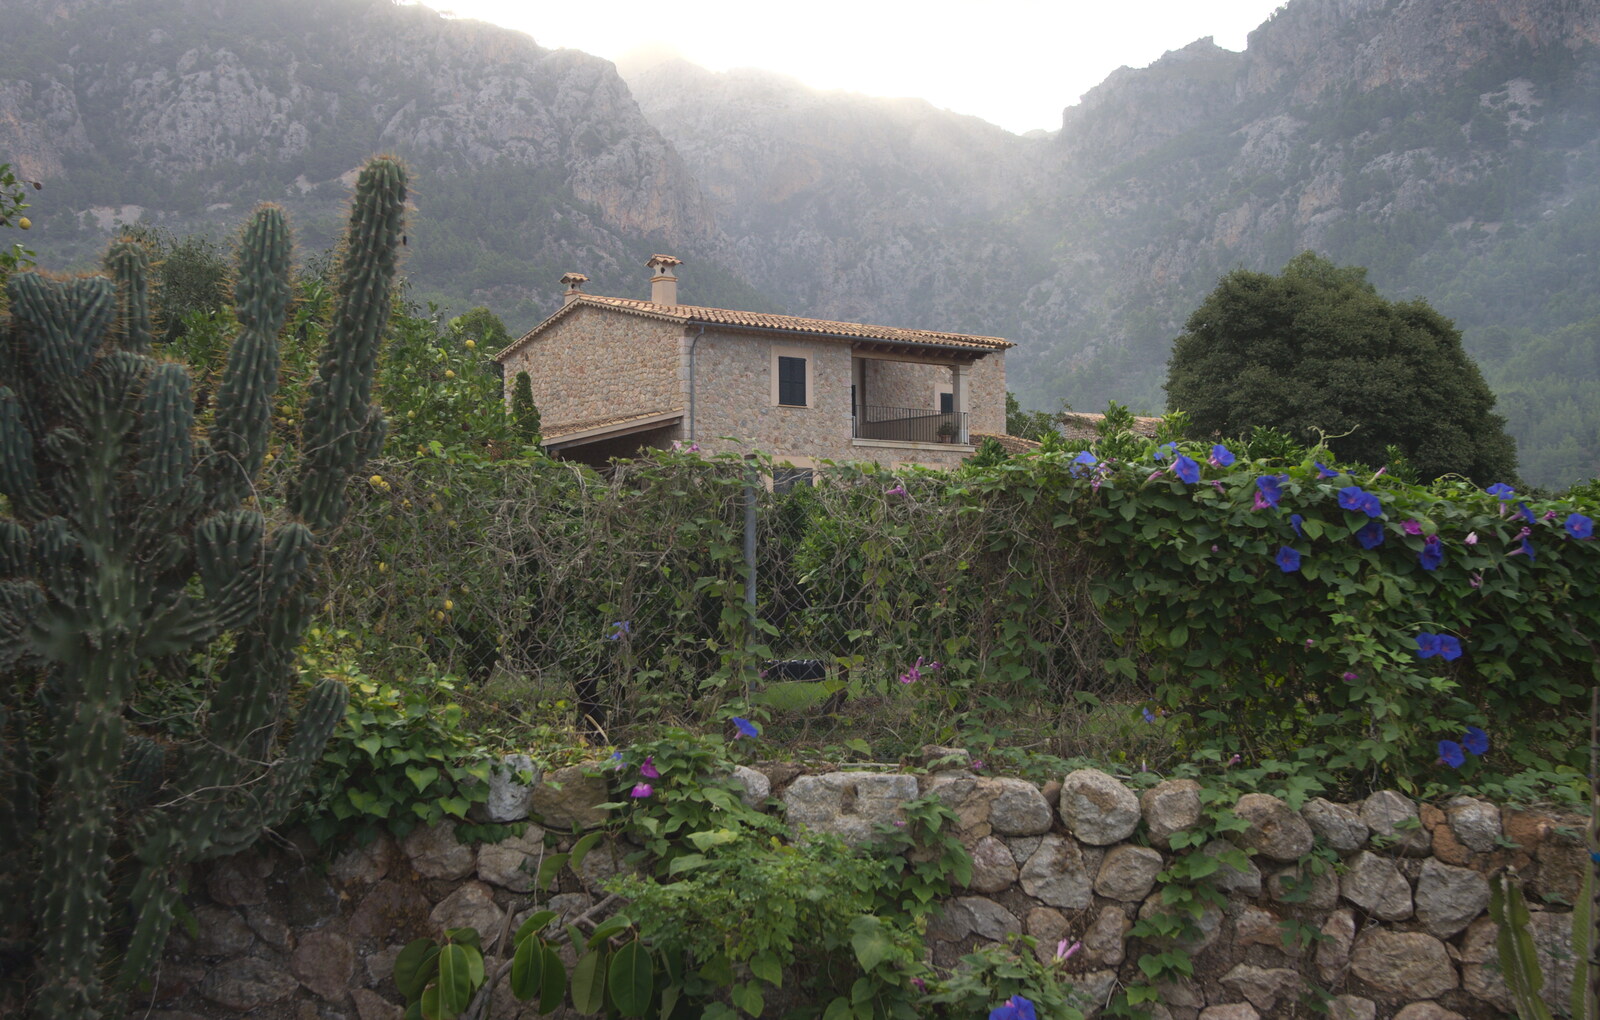 A house perched up in the hills from A Few Hours in Valdemossa, Mallorca, Spain - 13th September 2012